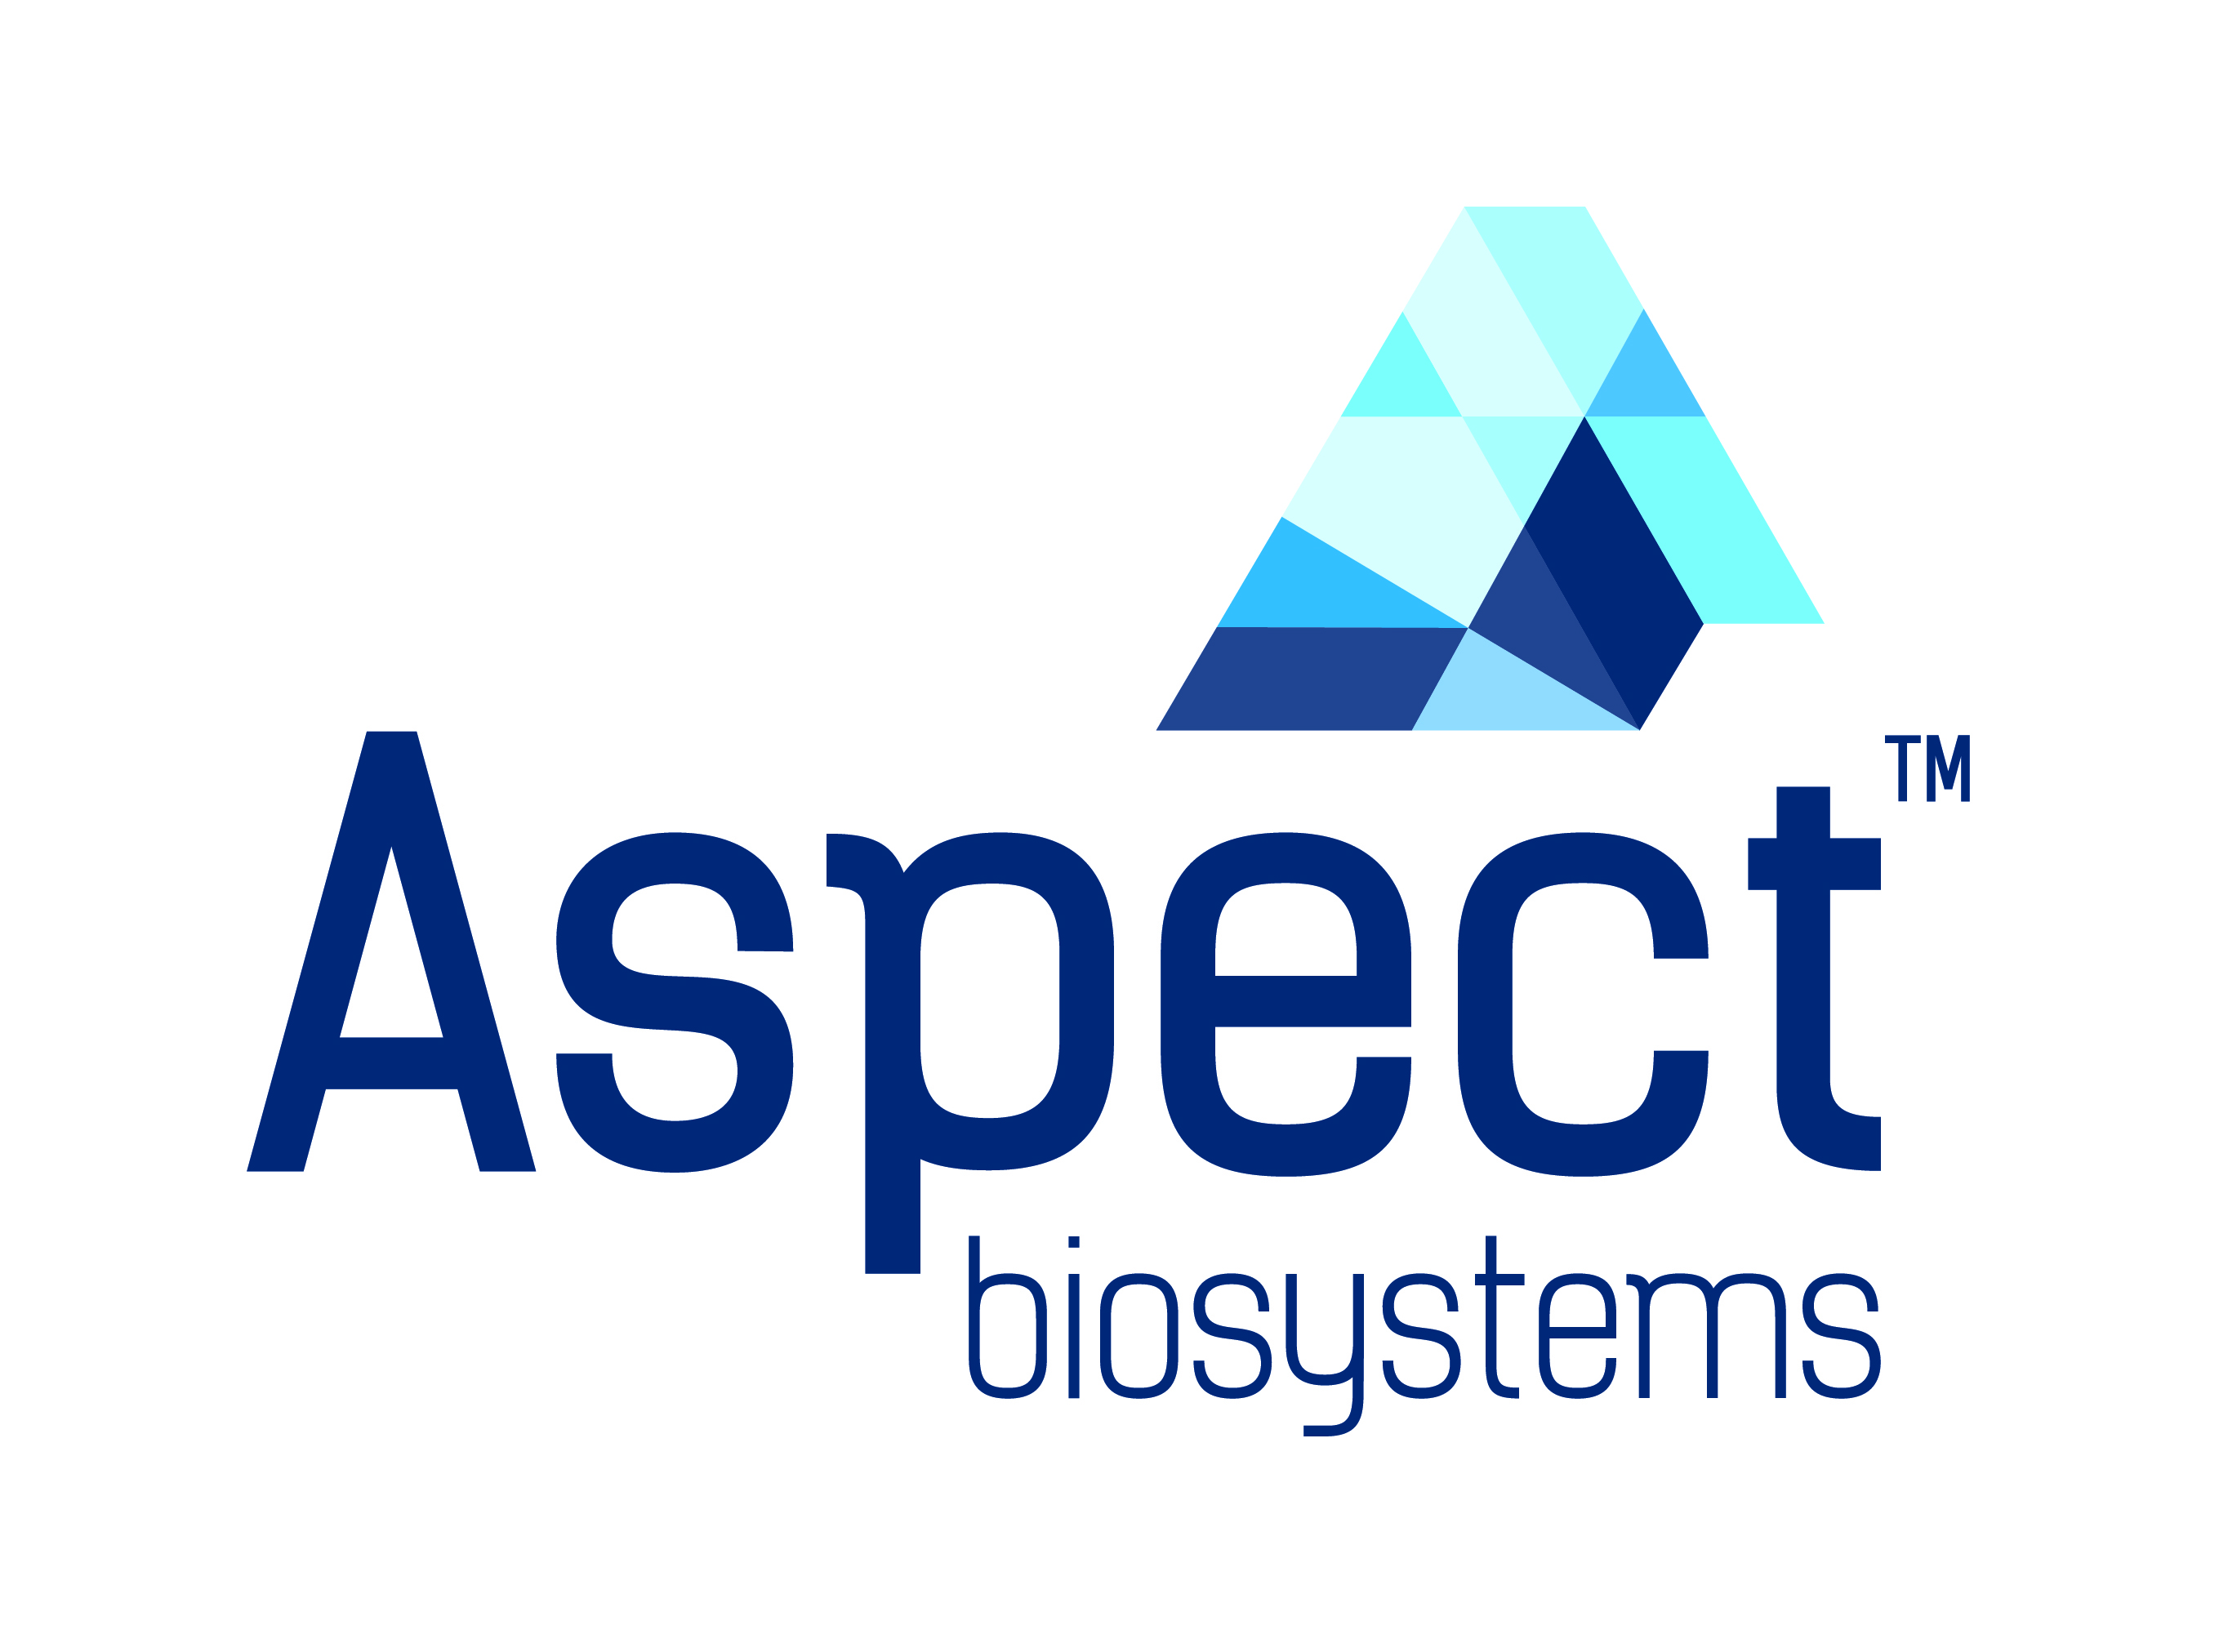 Aspect Biosystems is part of the Vancouver Tech Showcase | #VanStartupCity | Vancouver Startup City: Capital